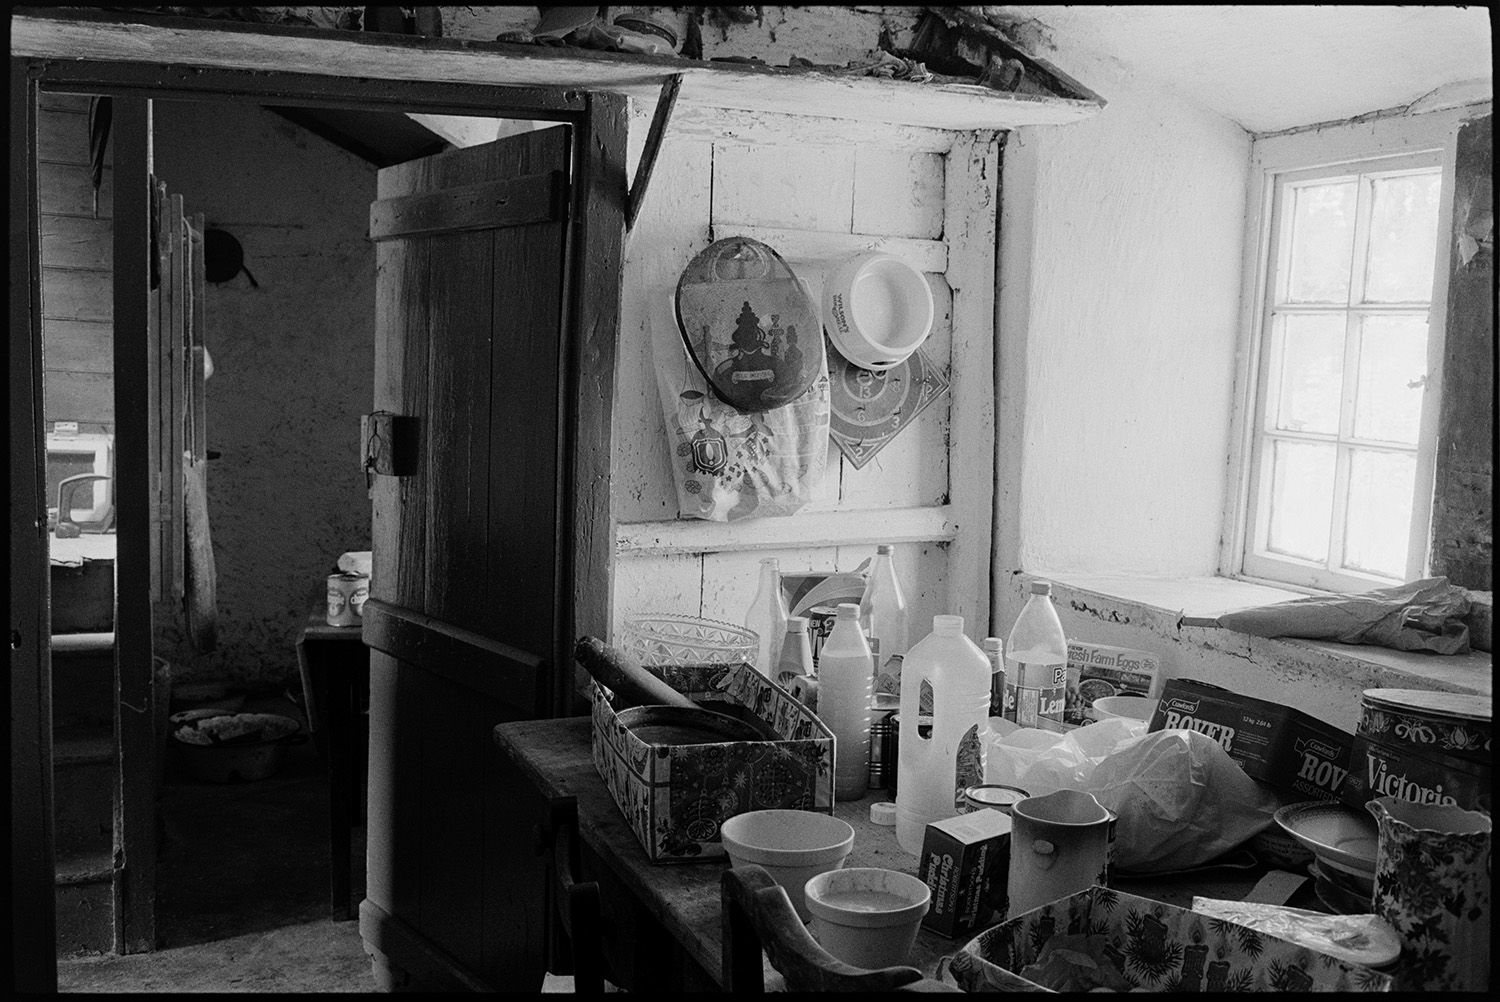 Farmer standing in kitchen, utensils etc, window.
[Utensils, bottles and boxes on a table next to a window and open wooden door at Mount Pleasant, Beamsworthy.]